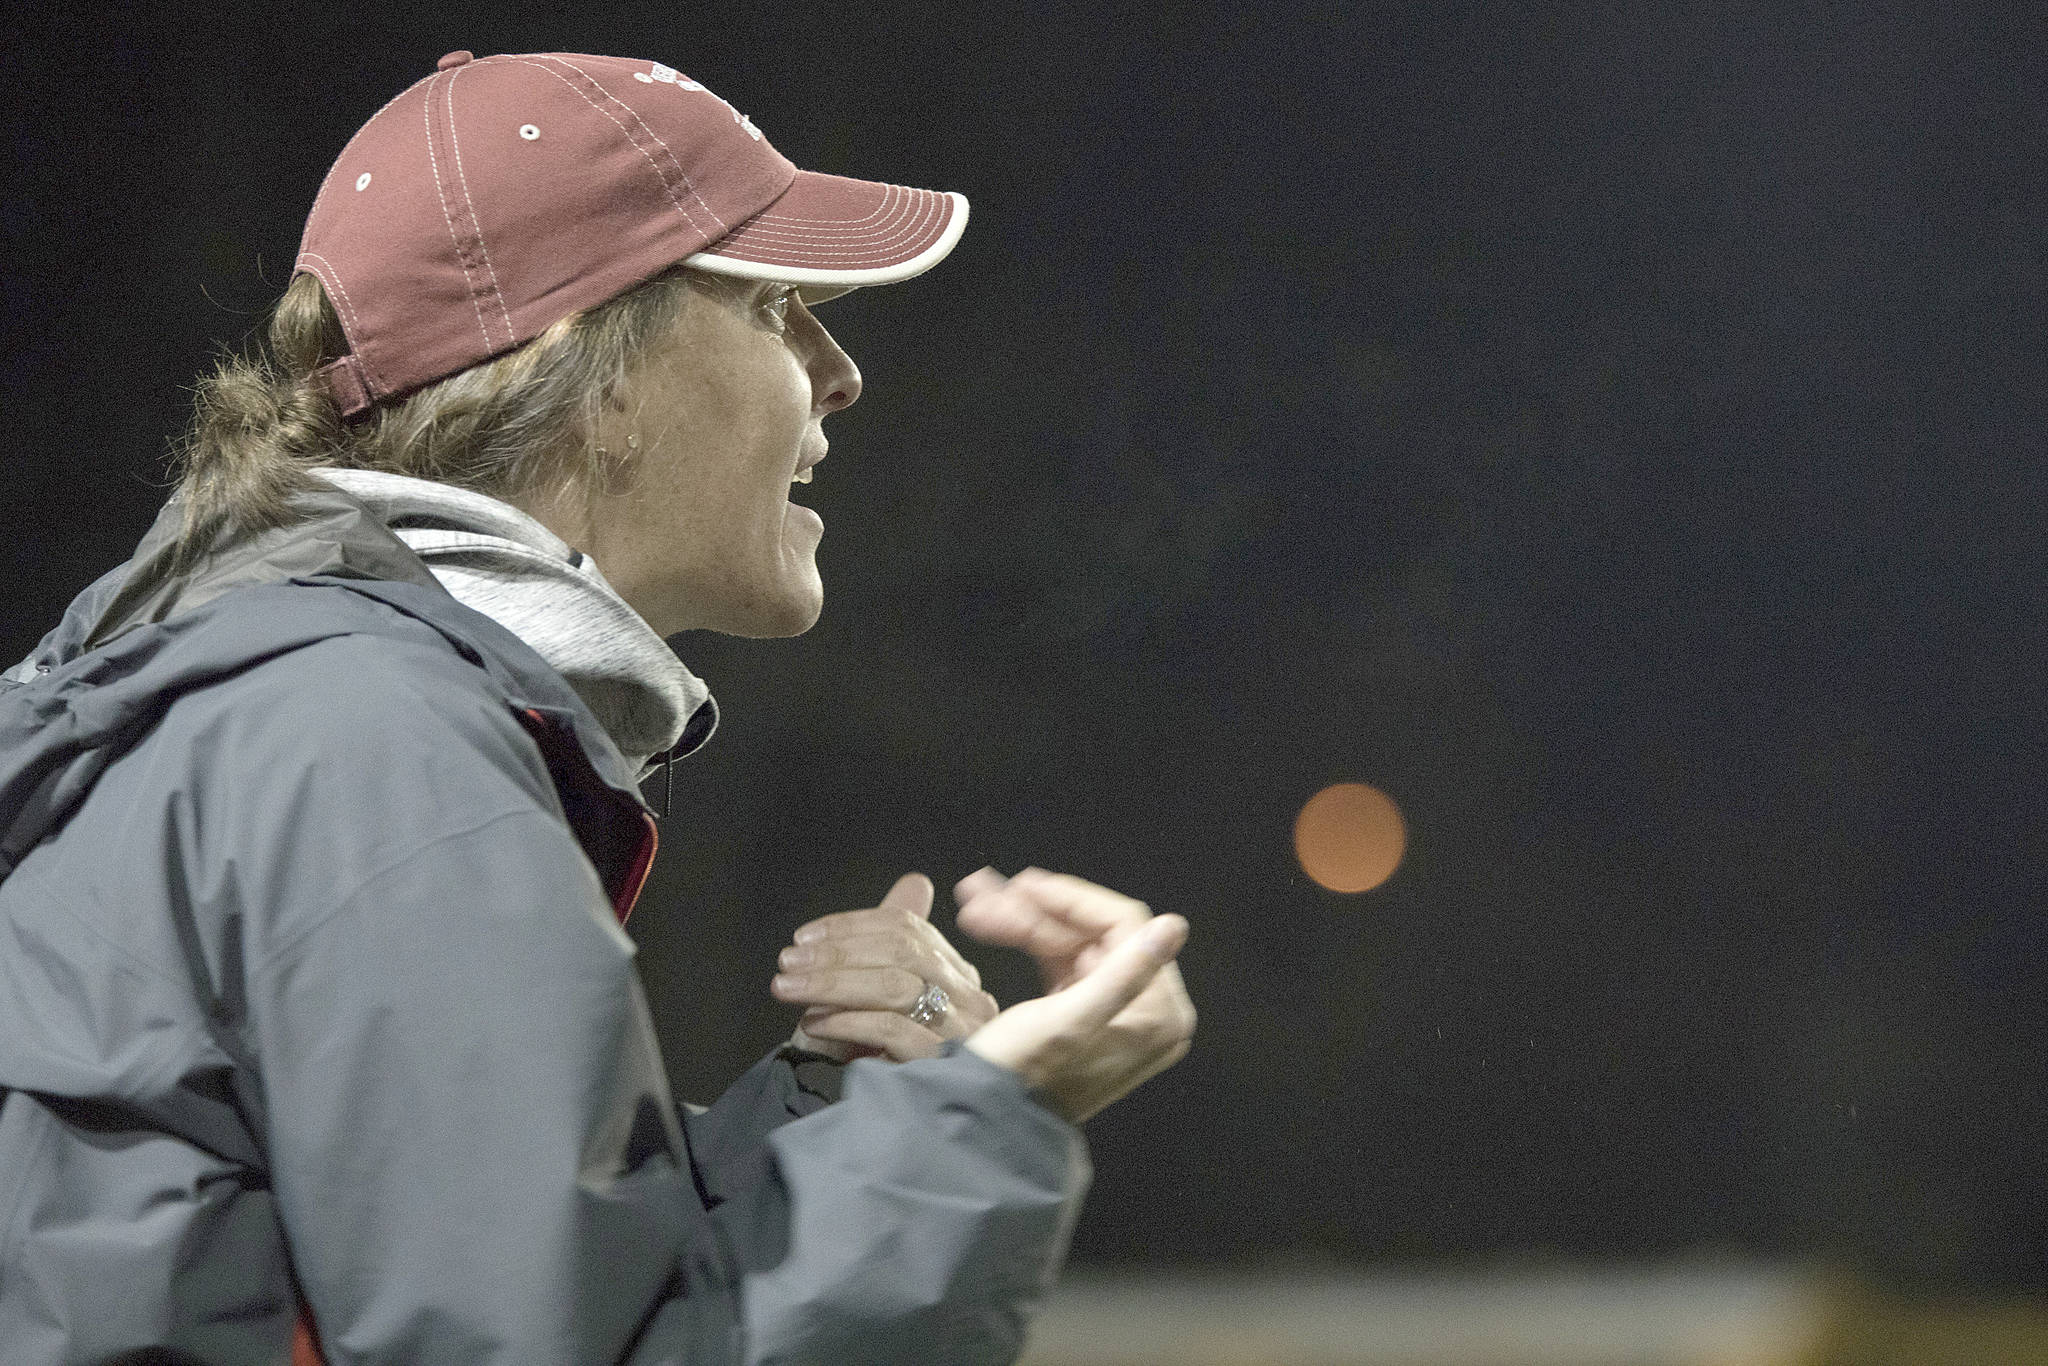 Photo courtesy of Robin Moore                                In her first season as the Mercer Island Islanders girls lacrosse head coach, Lyndsey Gillis was named the 2017 varsity coach of the year by the Washington State Girls Lacrosse Association. “I’m humbled to be honored as this year’s coach of the year. I couldn’t be more excited about joining the Mercer Island lacrosse community and look forward to continuing my work with our fabulous young women,” Gillis said.